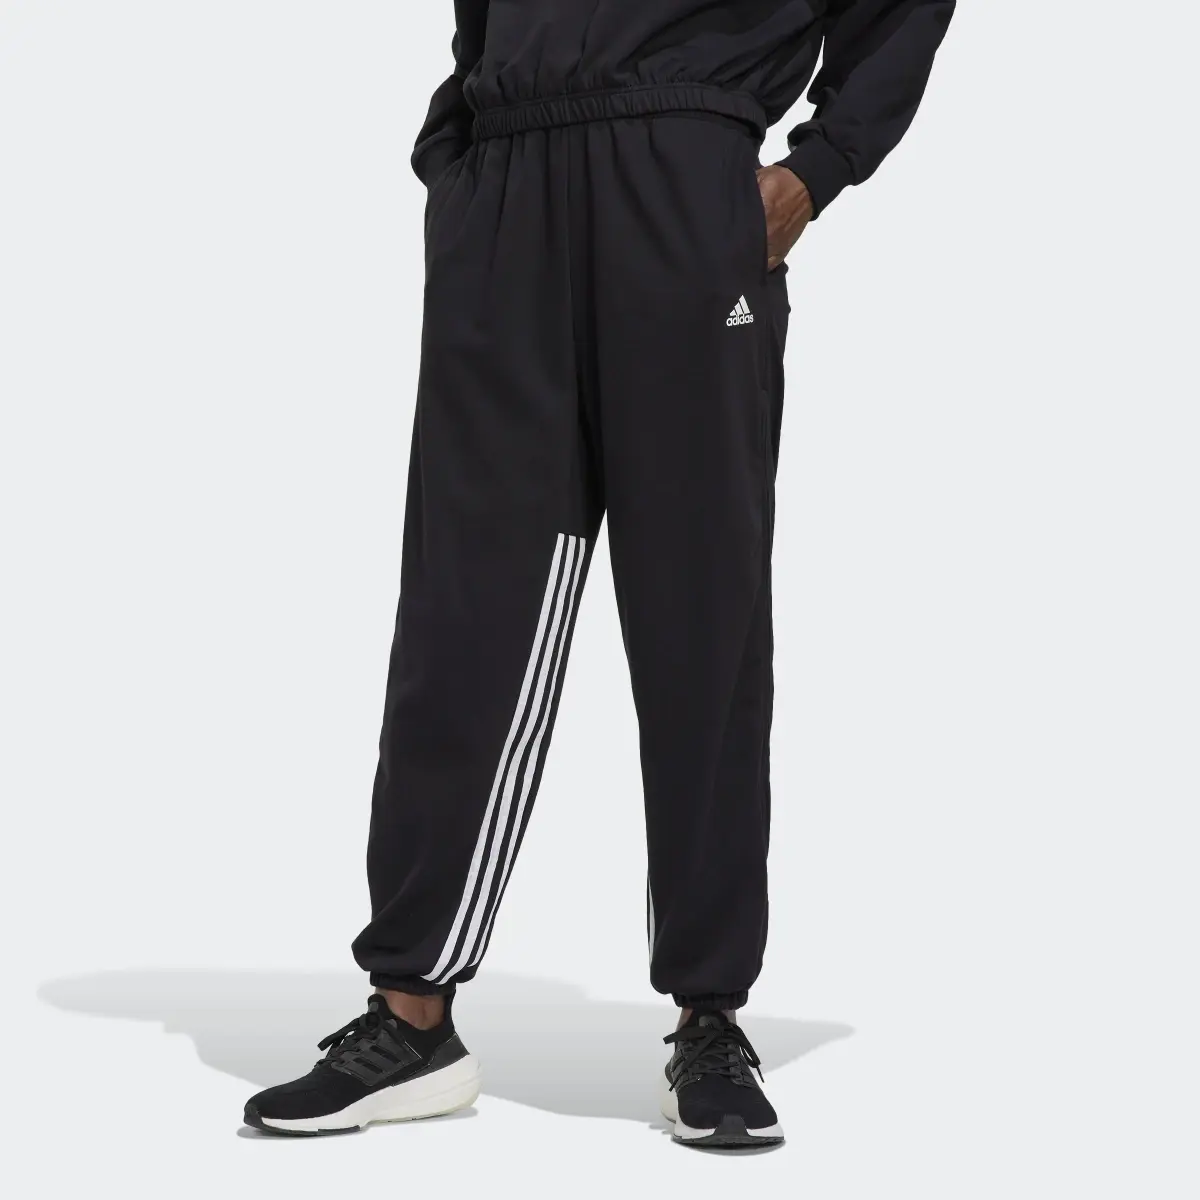 Adidas Hyperglam 3-Stripes Oversized Cuffed Joggers with Side Zippers. 1